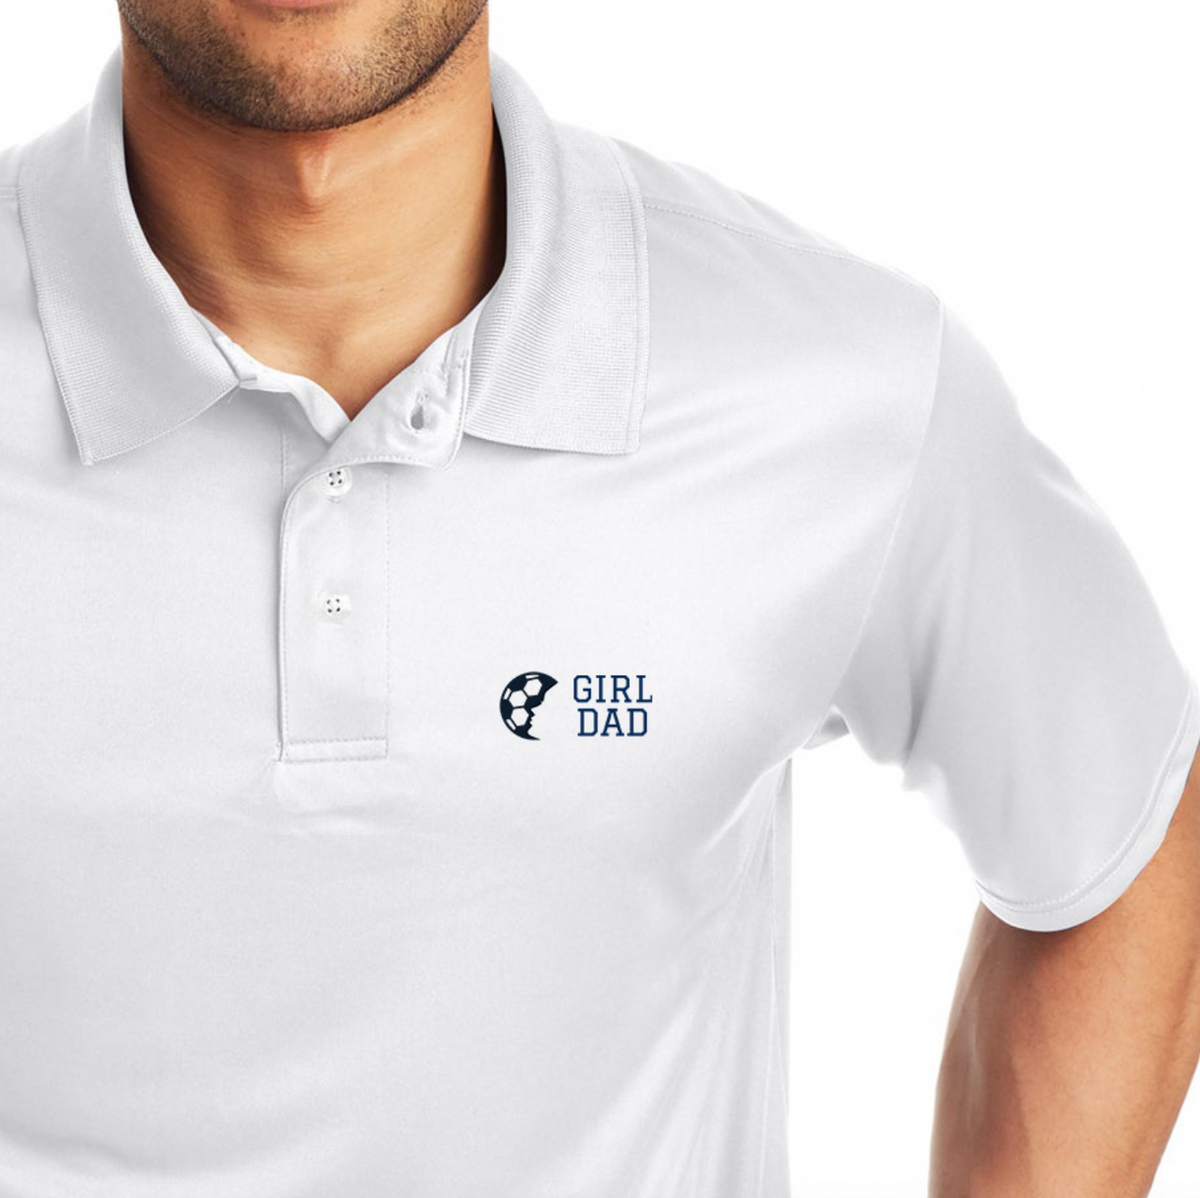 girl dad embroidered navy and white performance polo golf shirt soccer